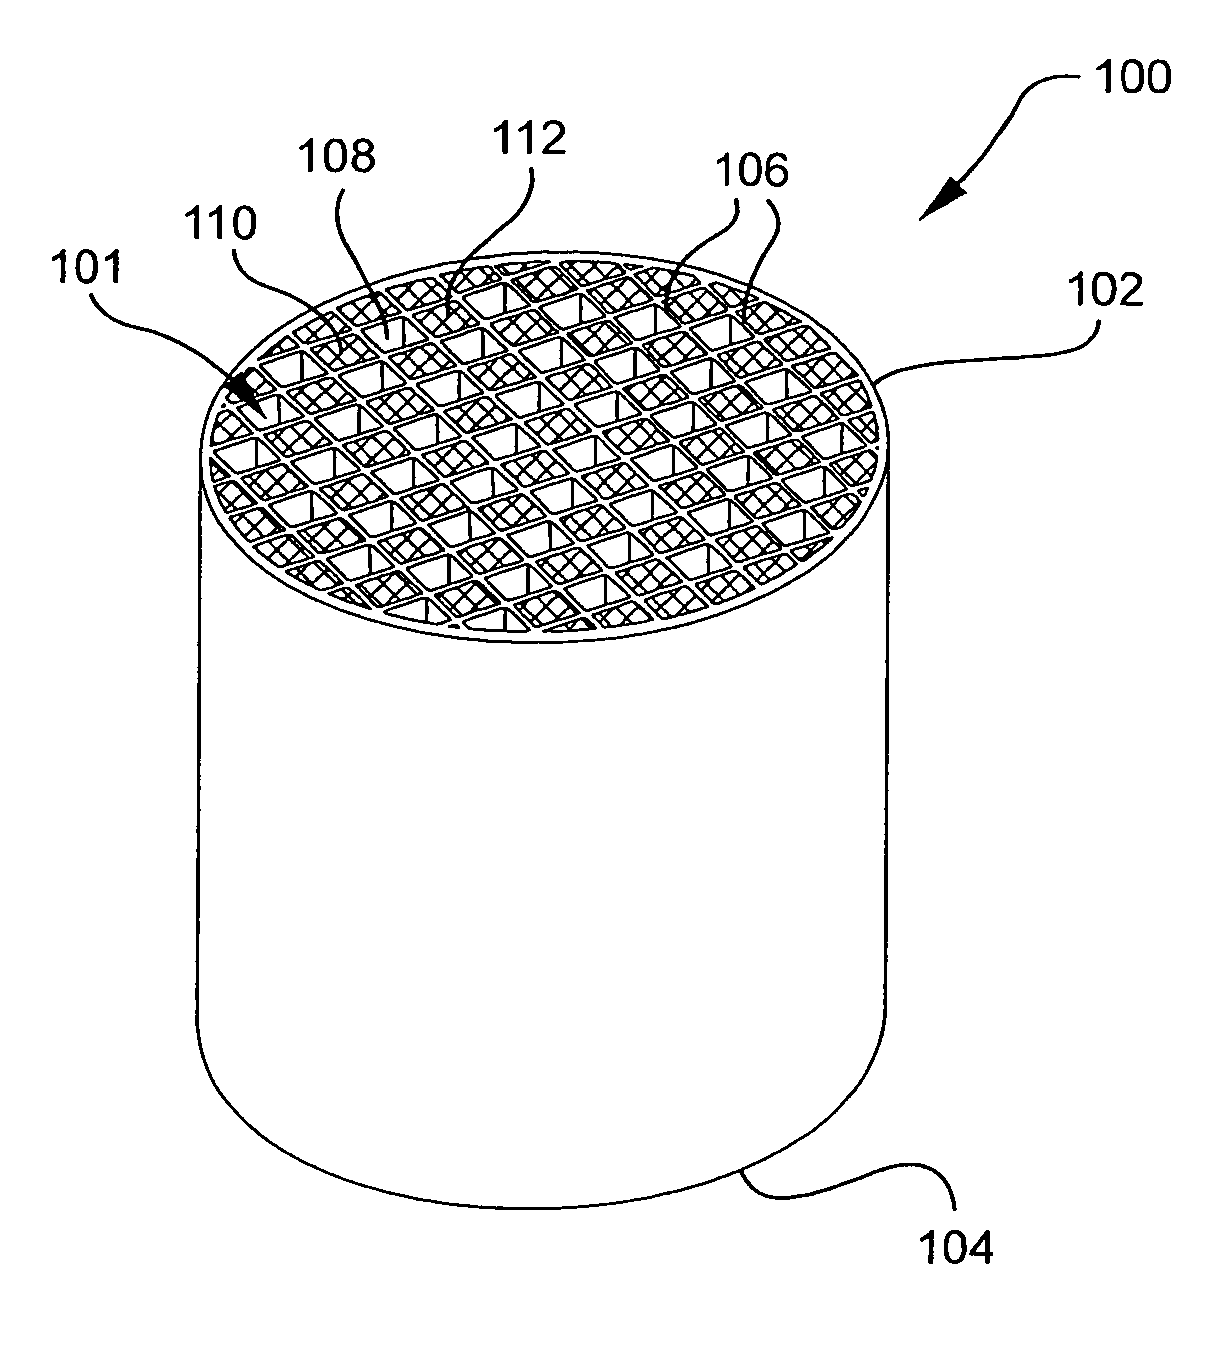 Cordierite honeycomb article and method of manufacture